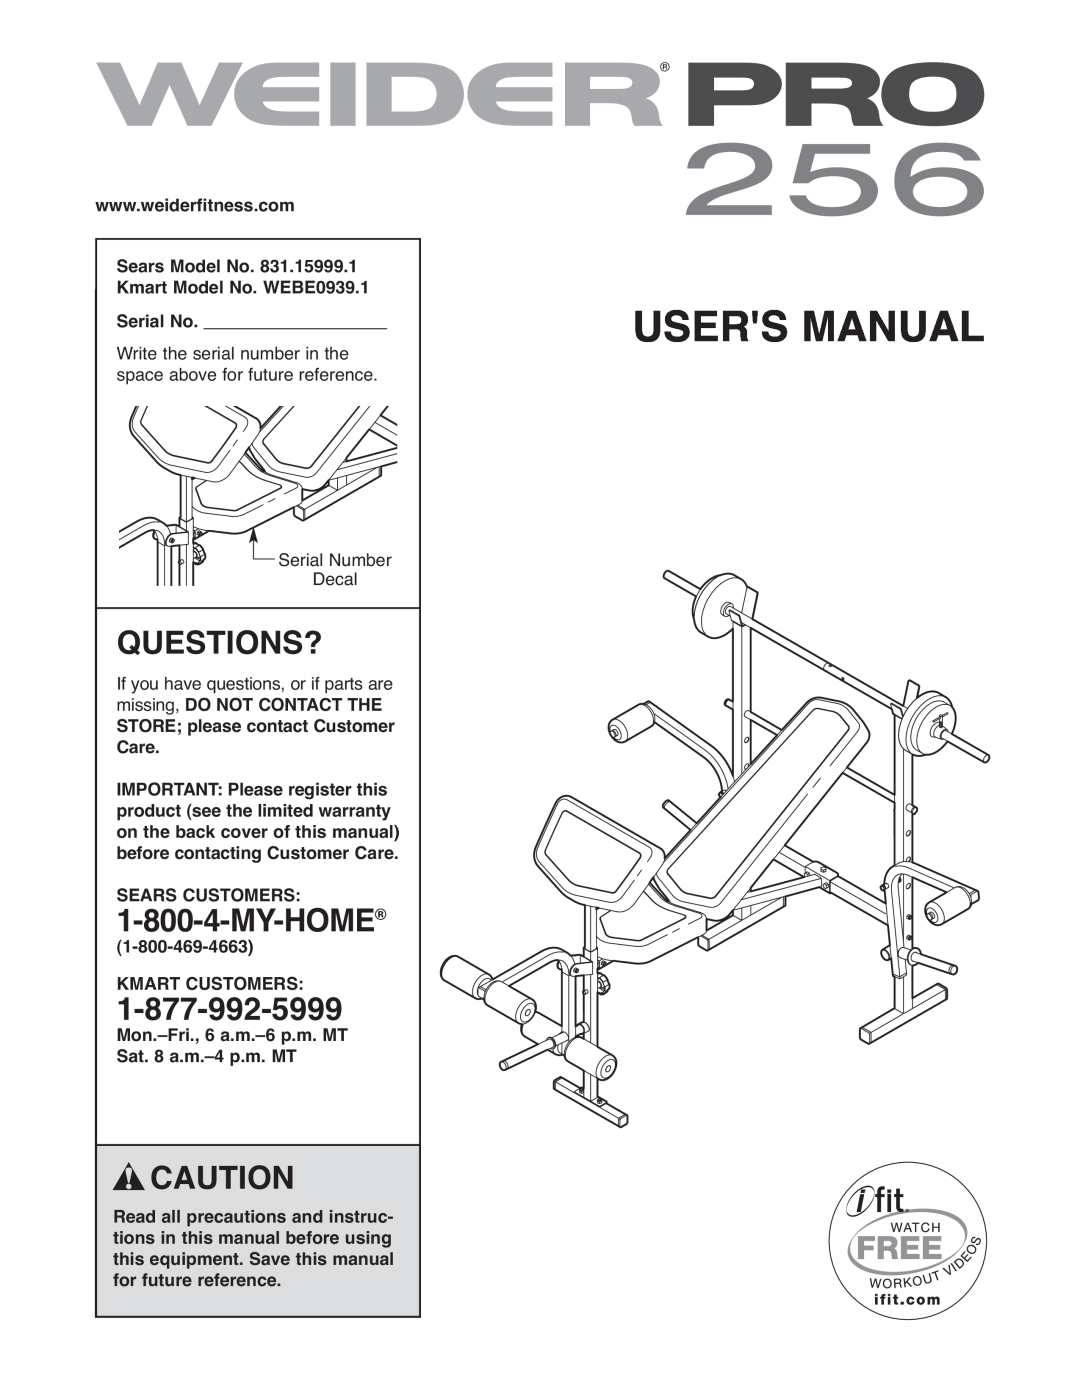 Weider WEBE0939.1 user manual Questions?, 1SEARS-800CUSTO-4-MYERS-HOME, STORE please contact Customer Care, Users Manual 